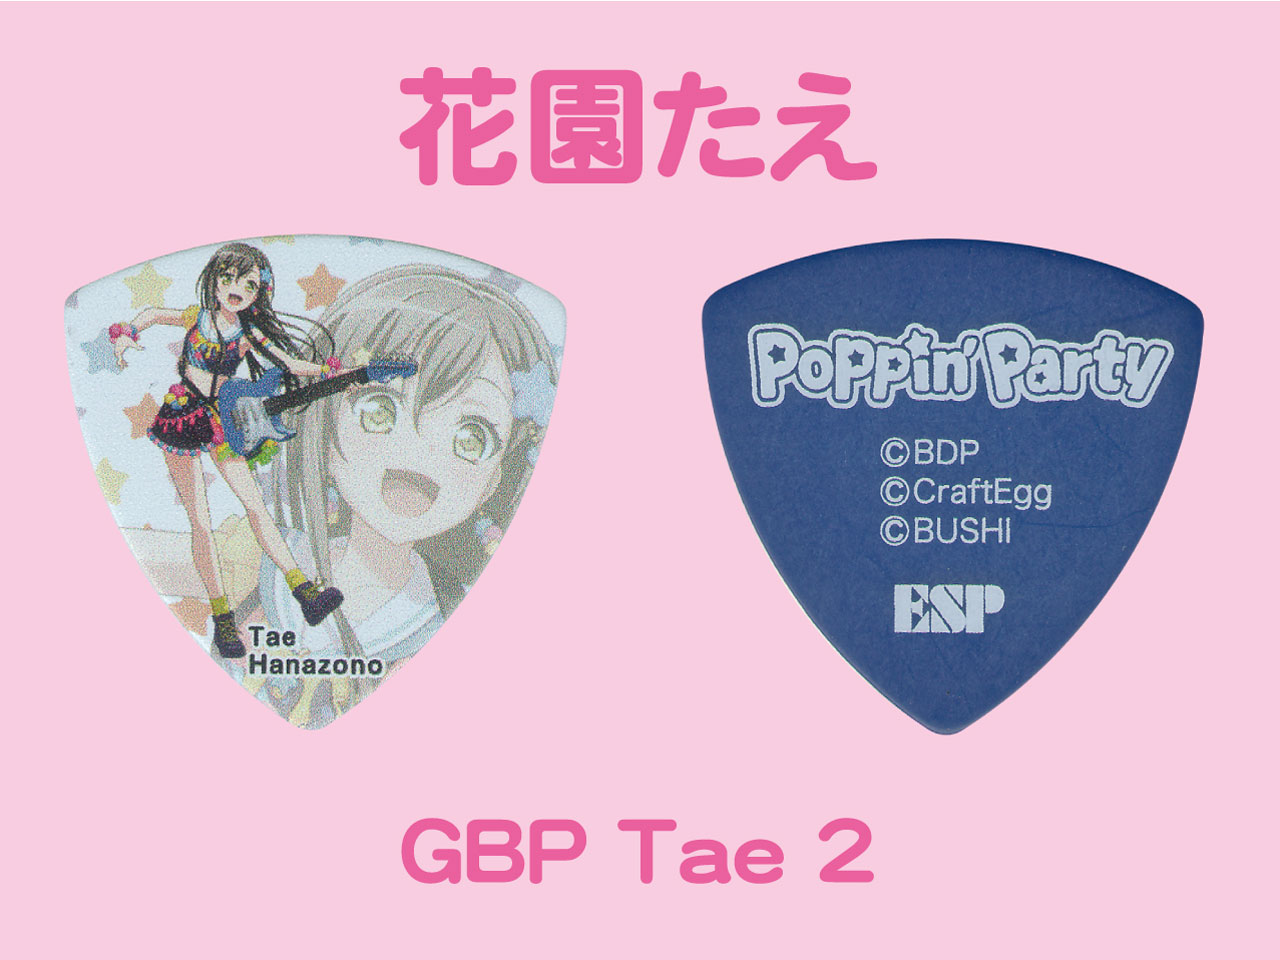 【ESP×BanG Dream!コラボピック】Poppin' Party Character Pick "花園たえ"（GBP Tae 2）& "ハメパチ" セット